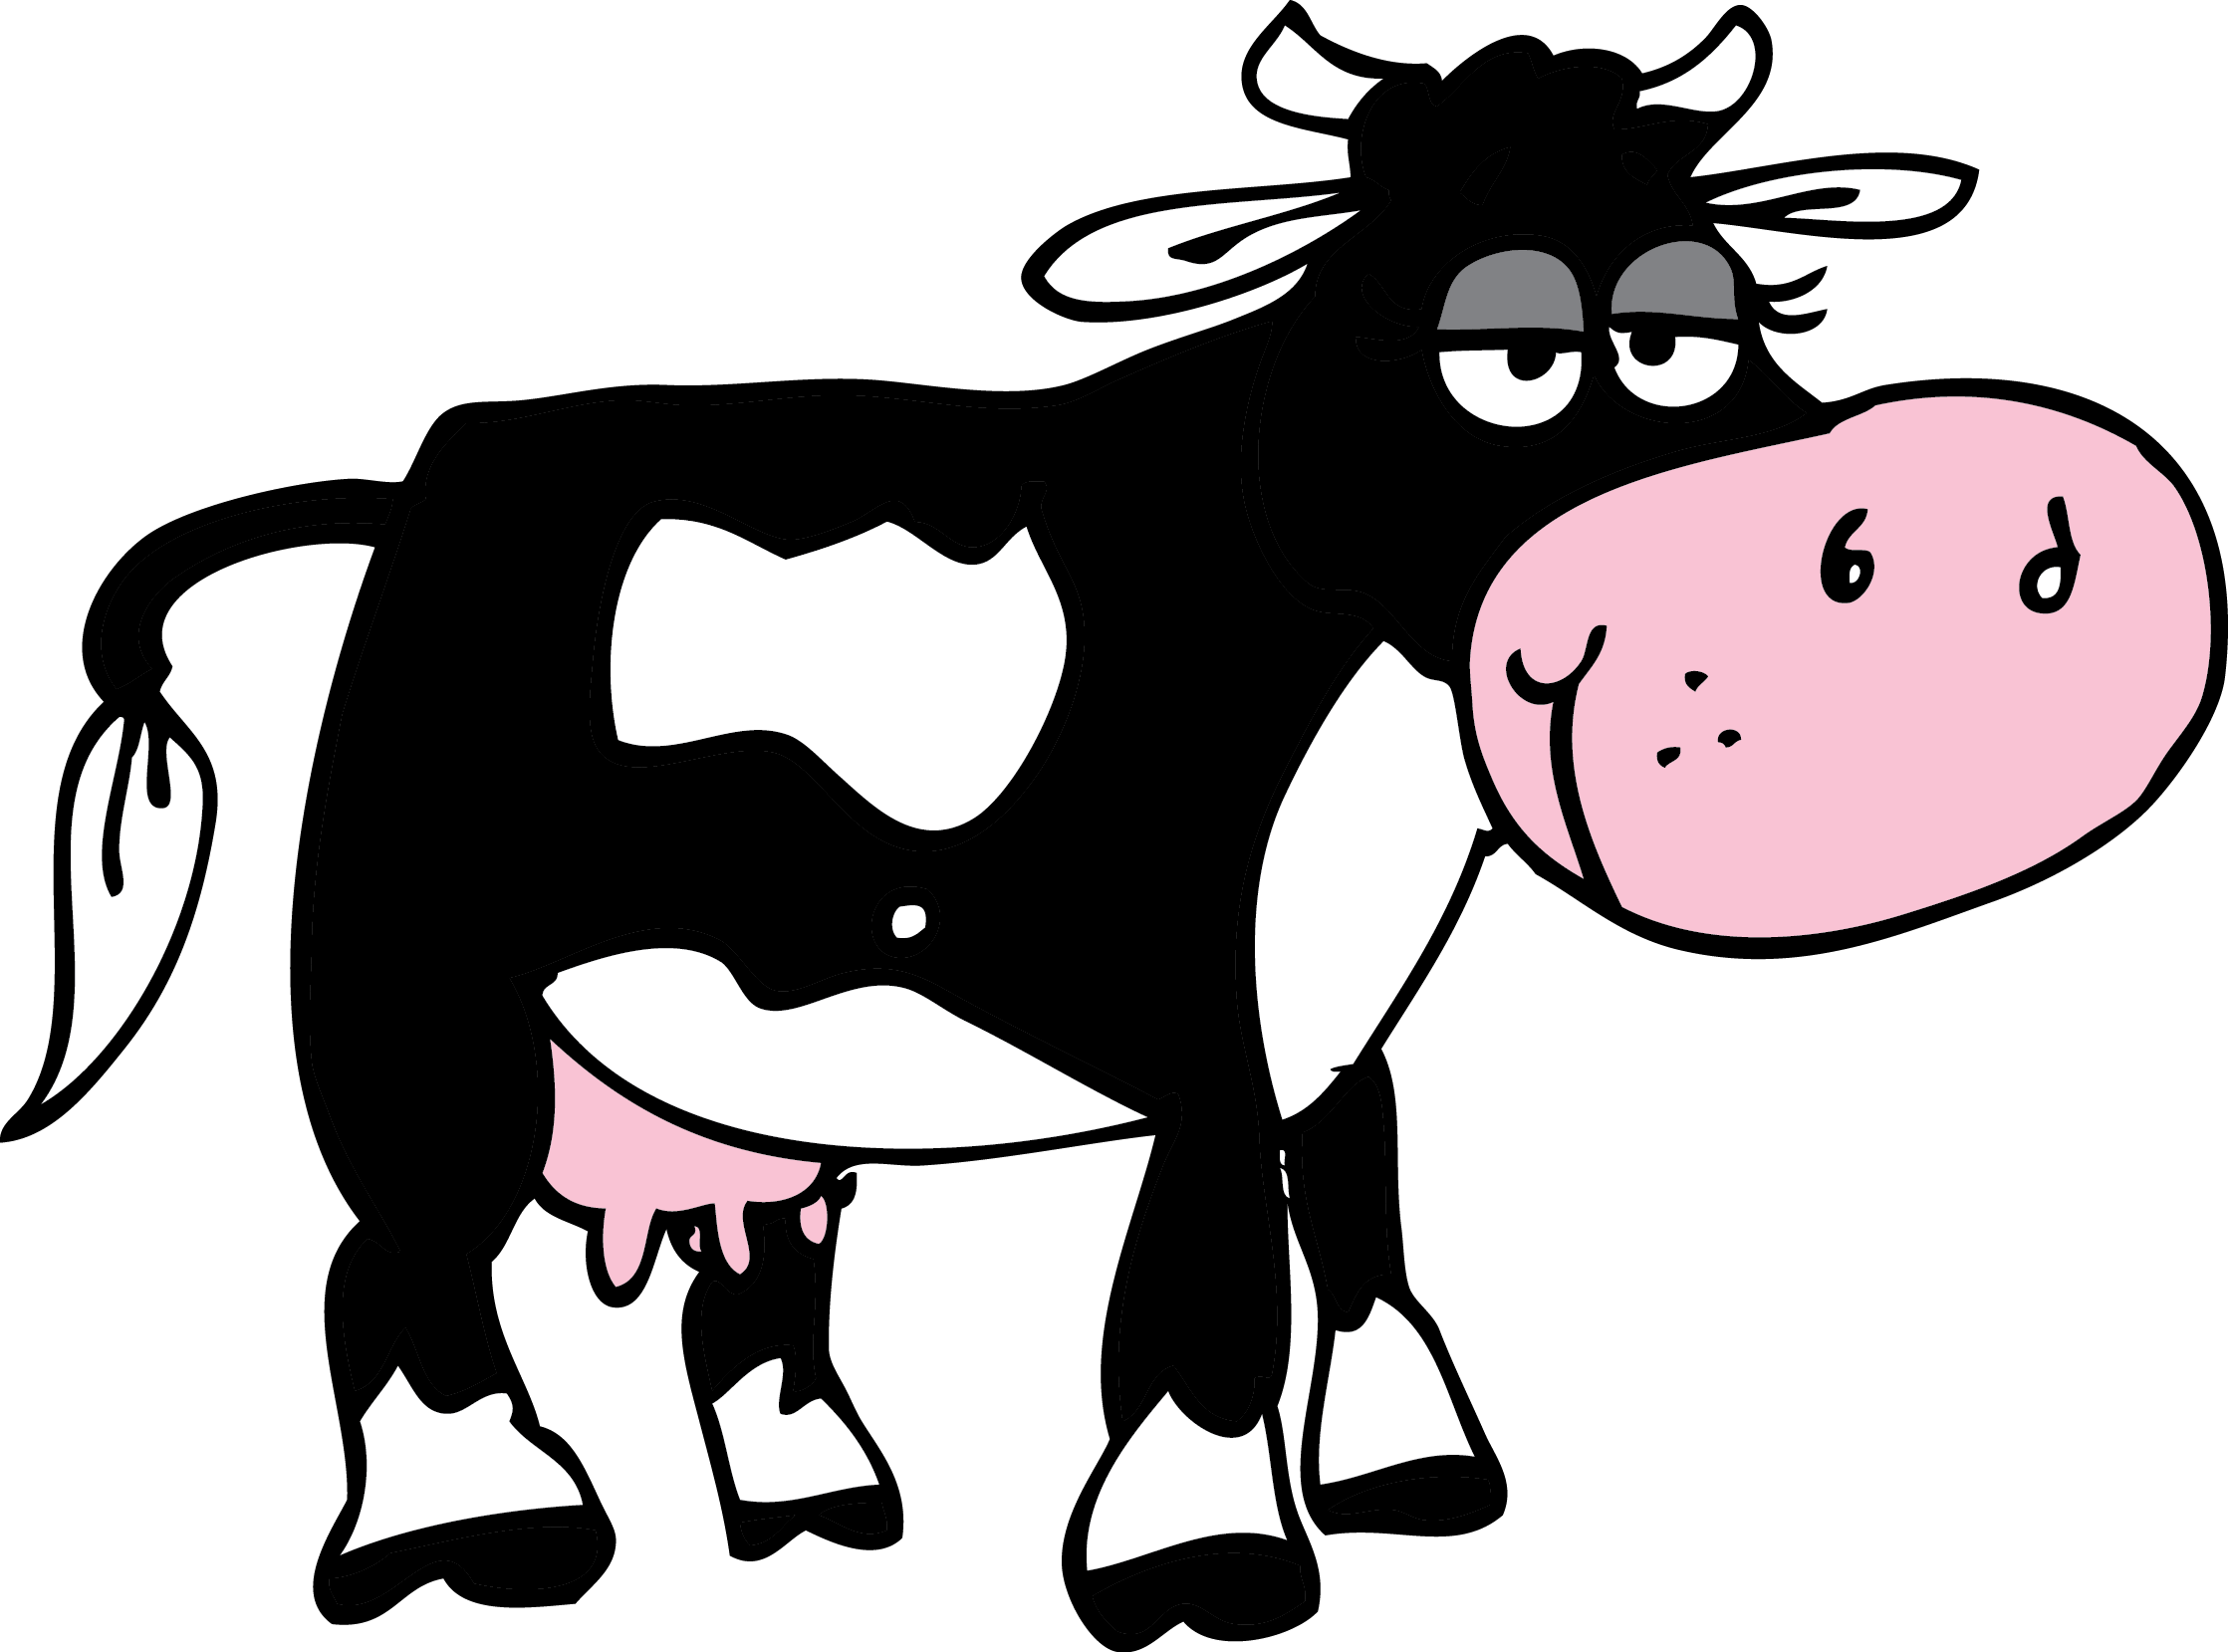 Cartoon cow jumping images. Dairy clipart triangle shaped thing